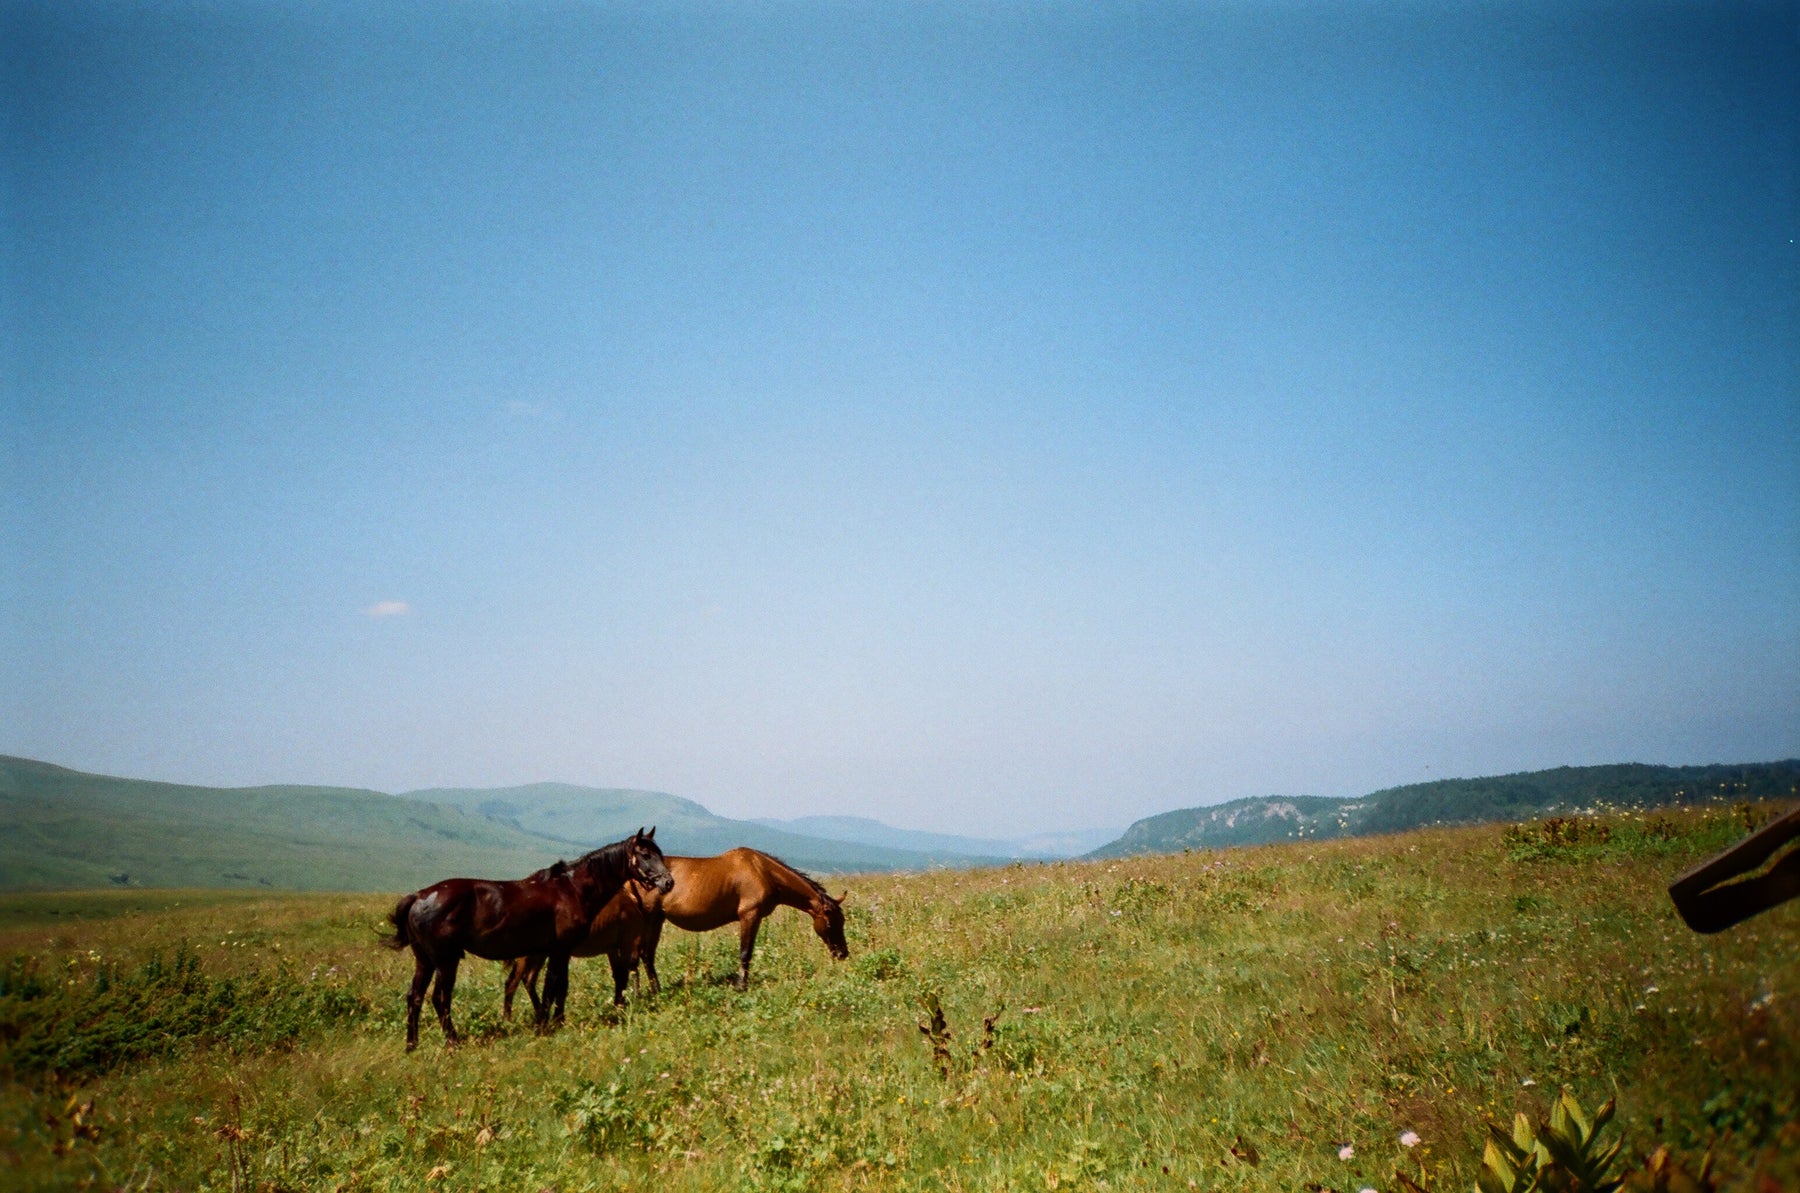 Horses standing in a pasture with a clear blue sky